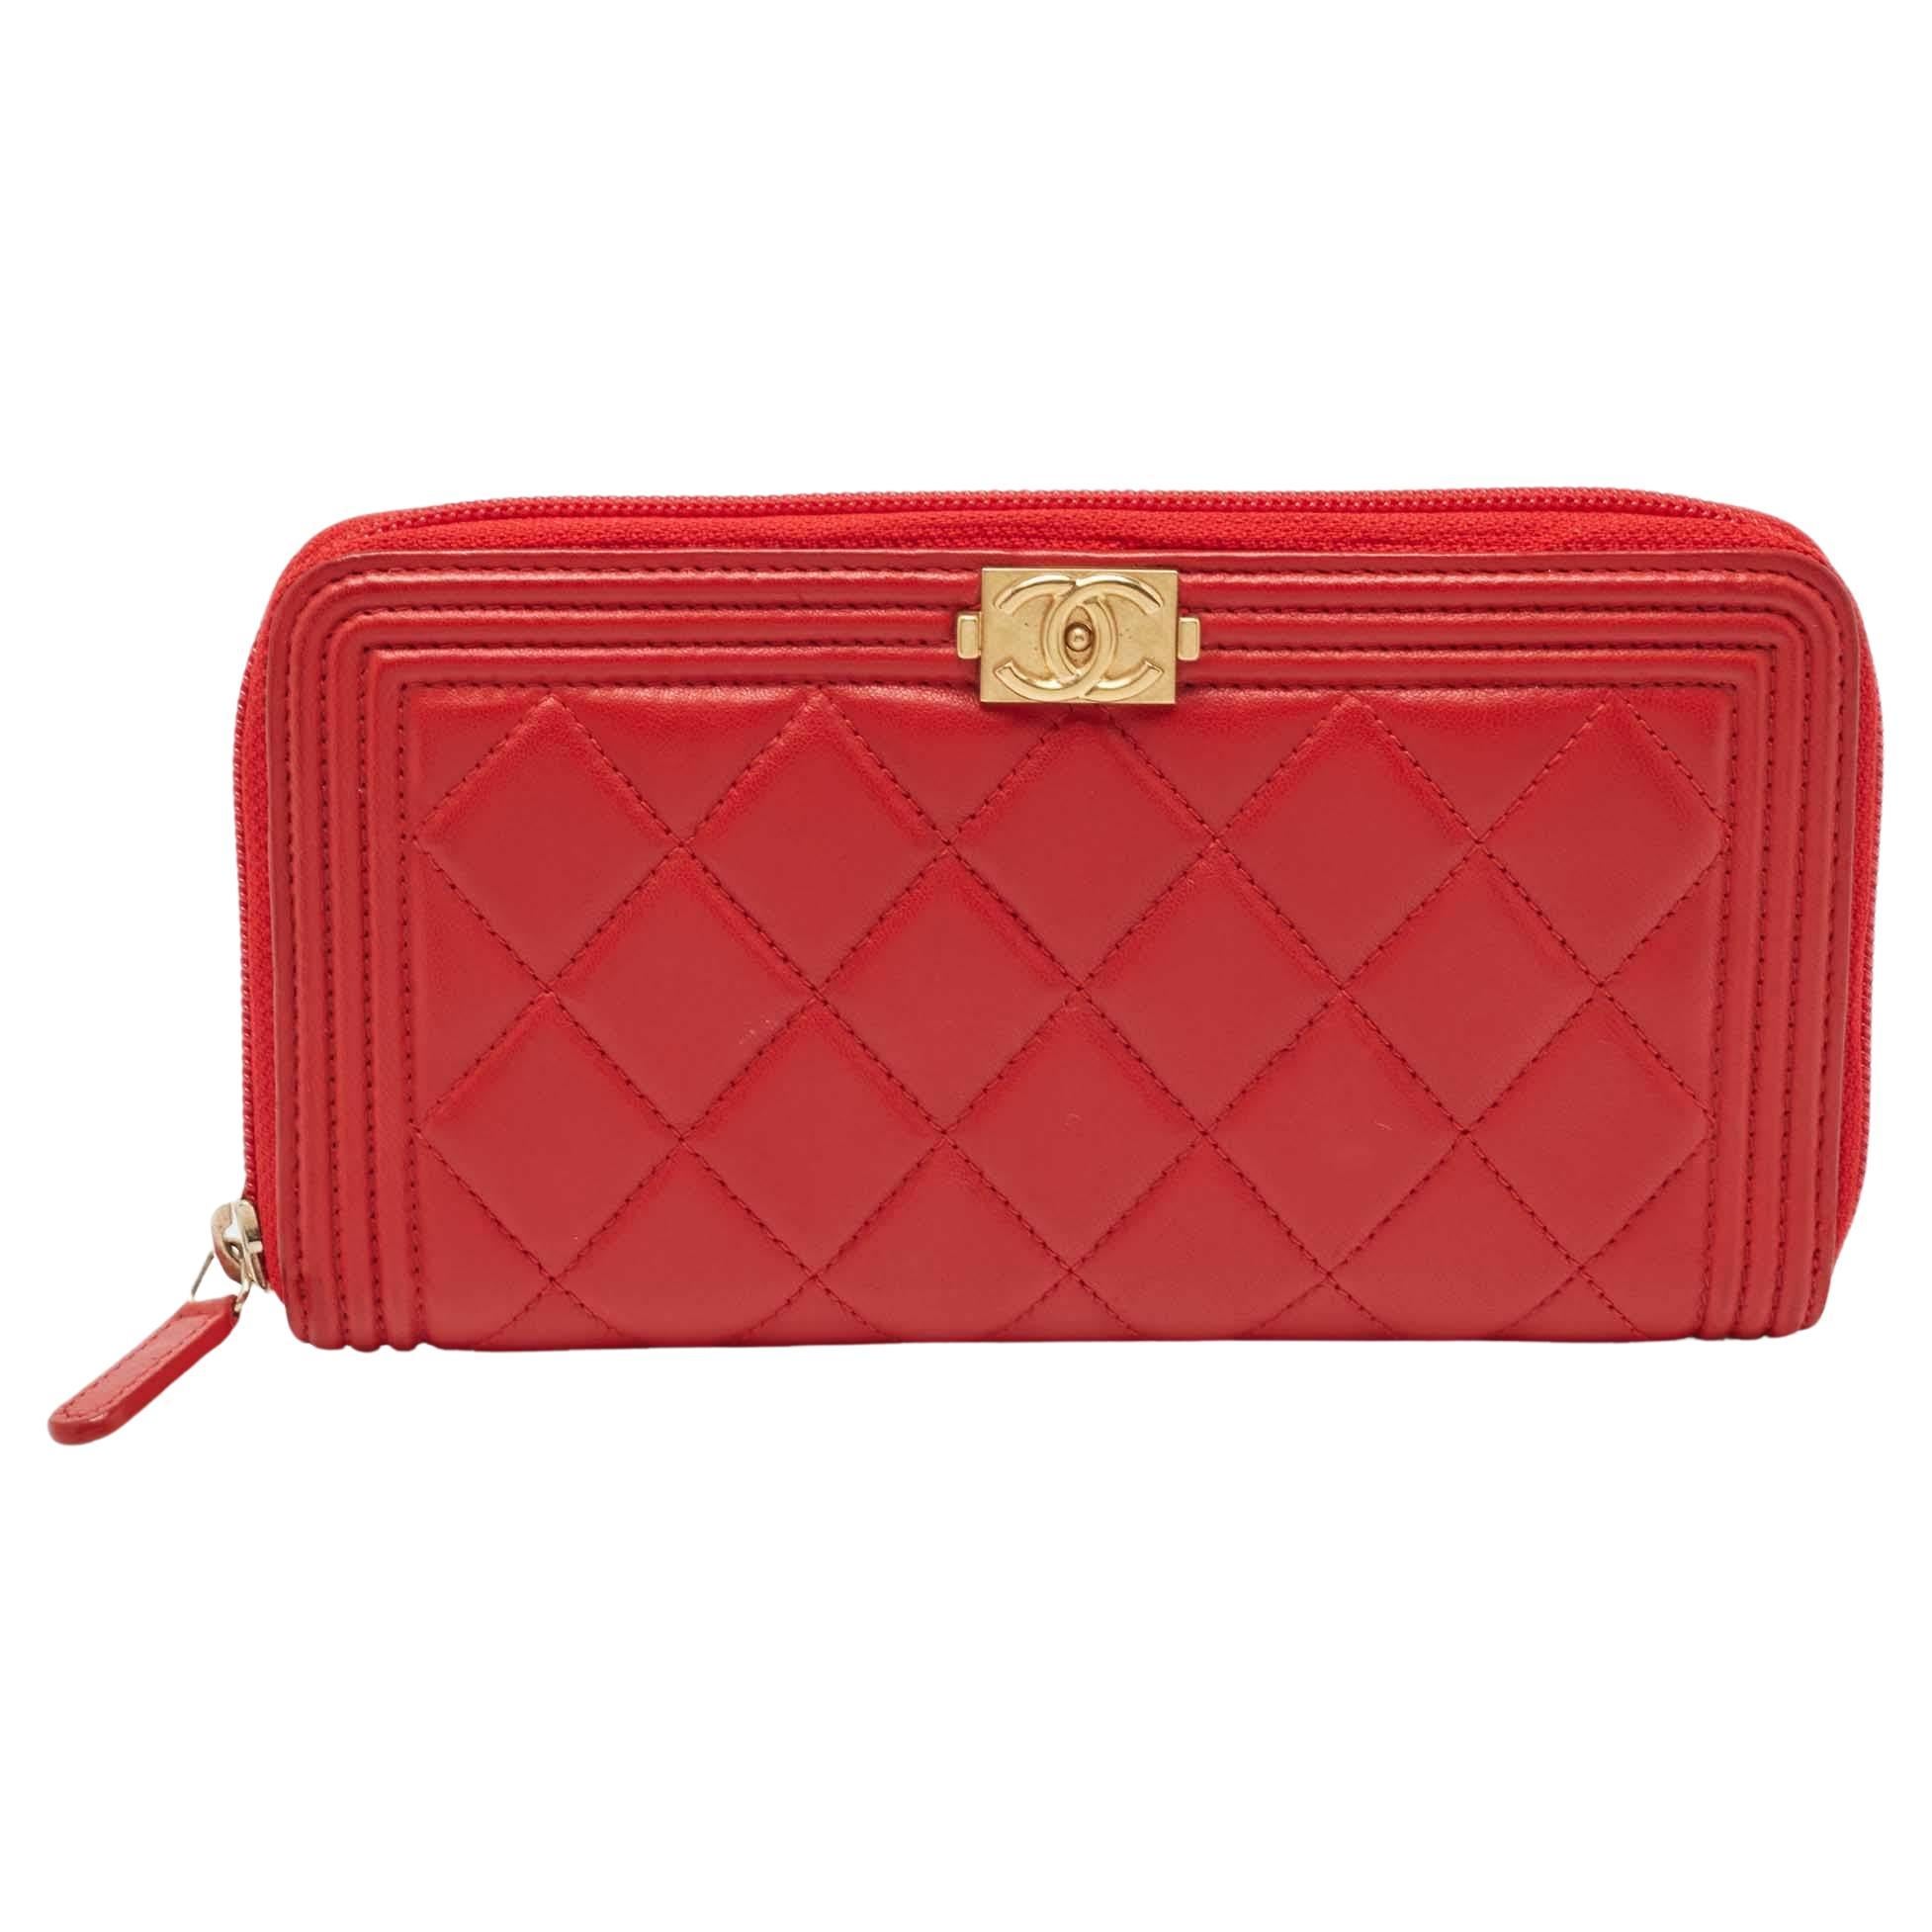 Chanel Red Quilted Leather Boy Zip Around Wallet For Sale